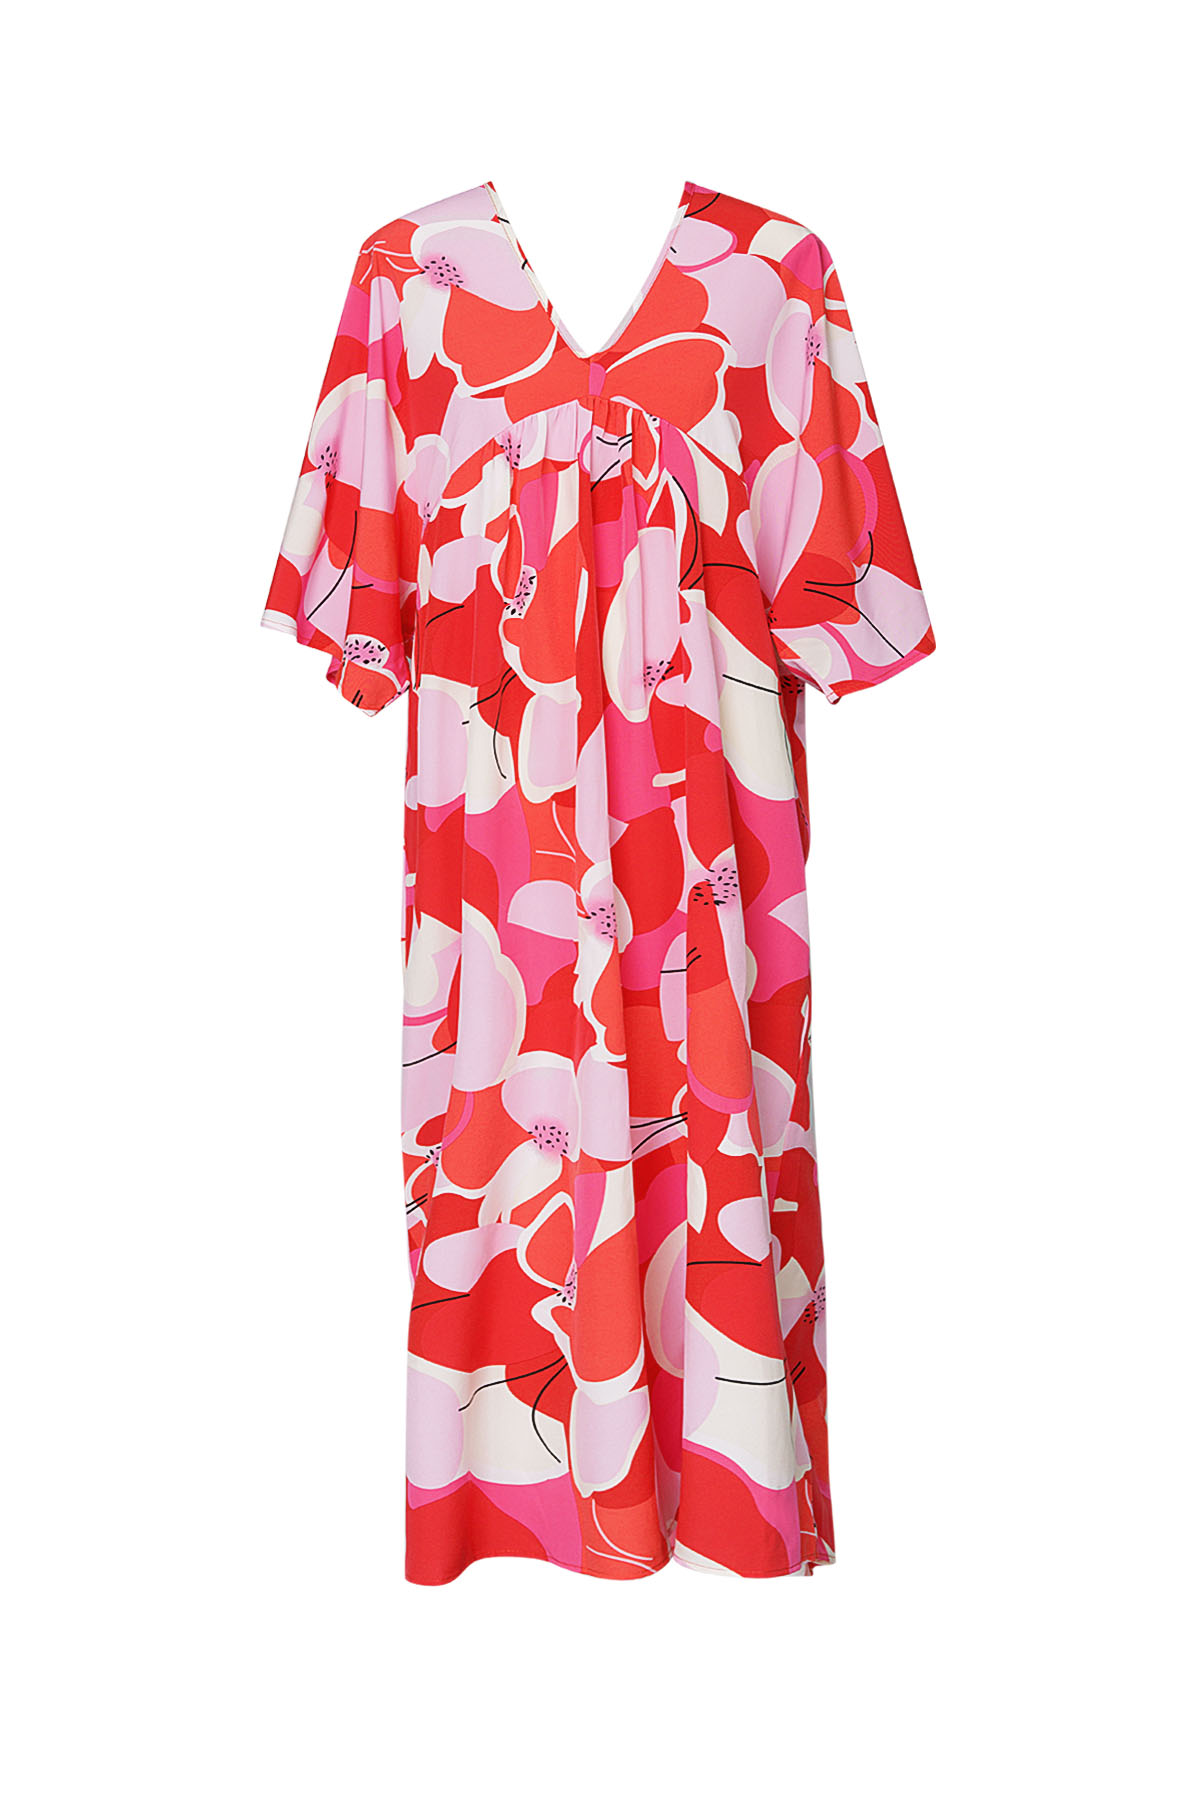 Abstract floral print dress - red